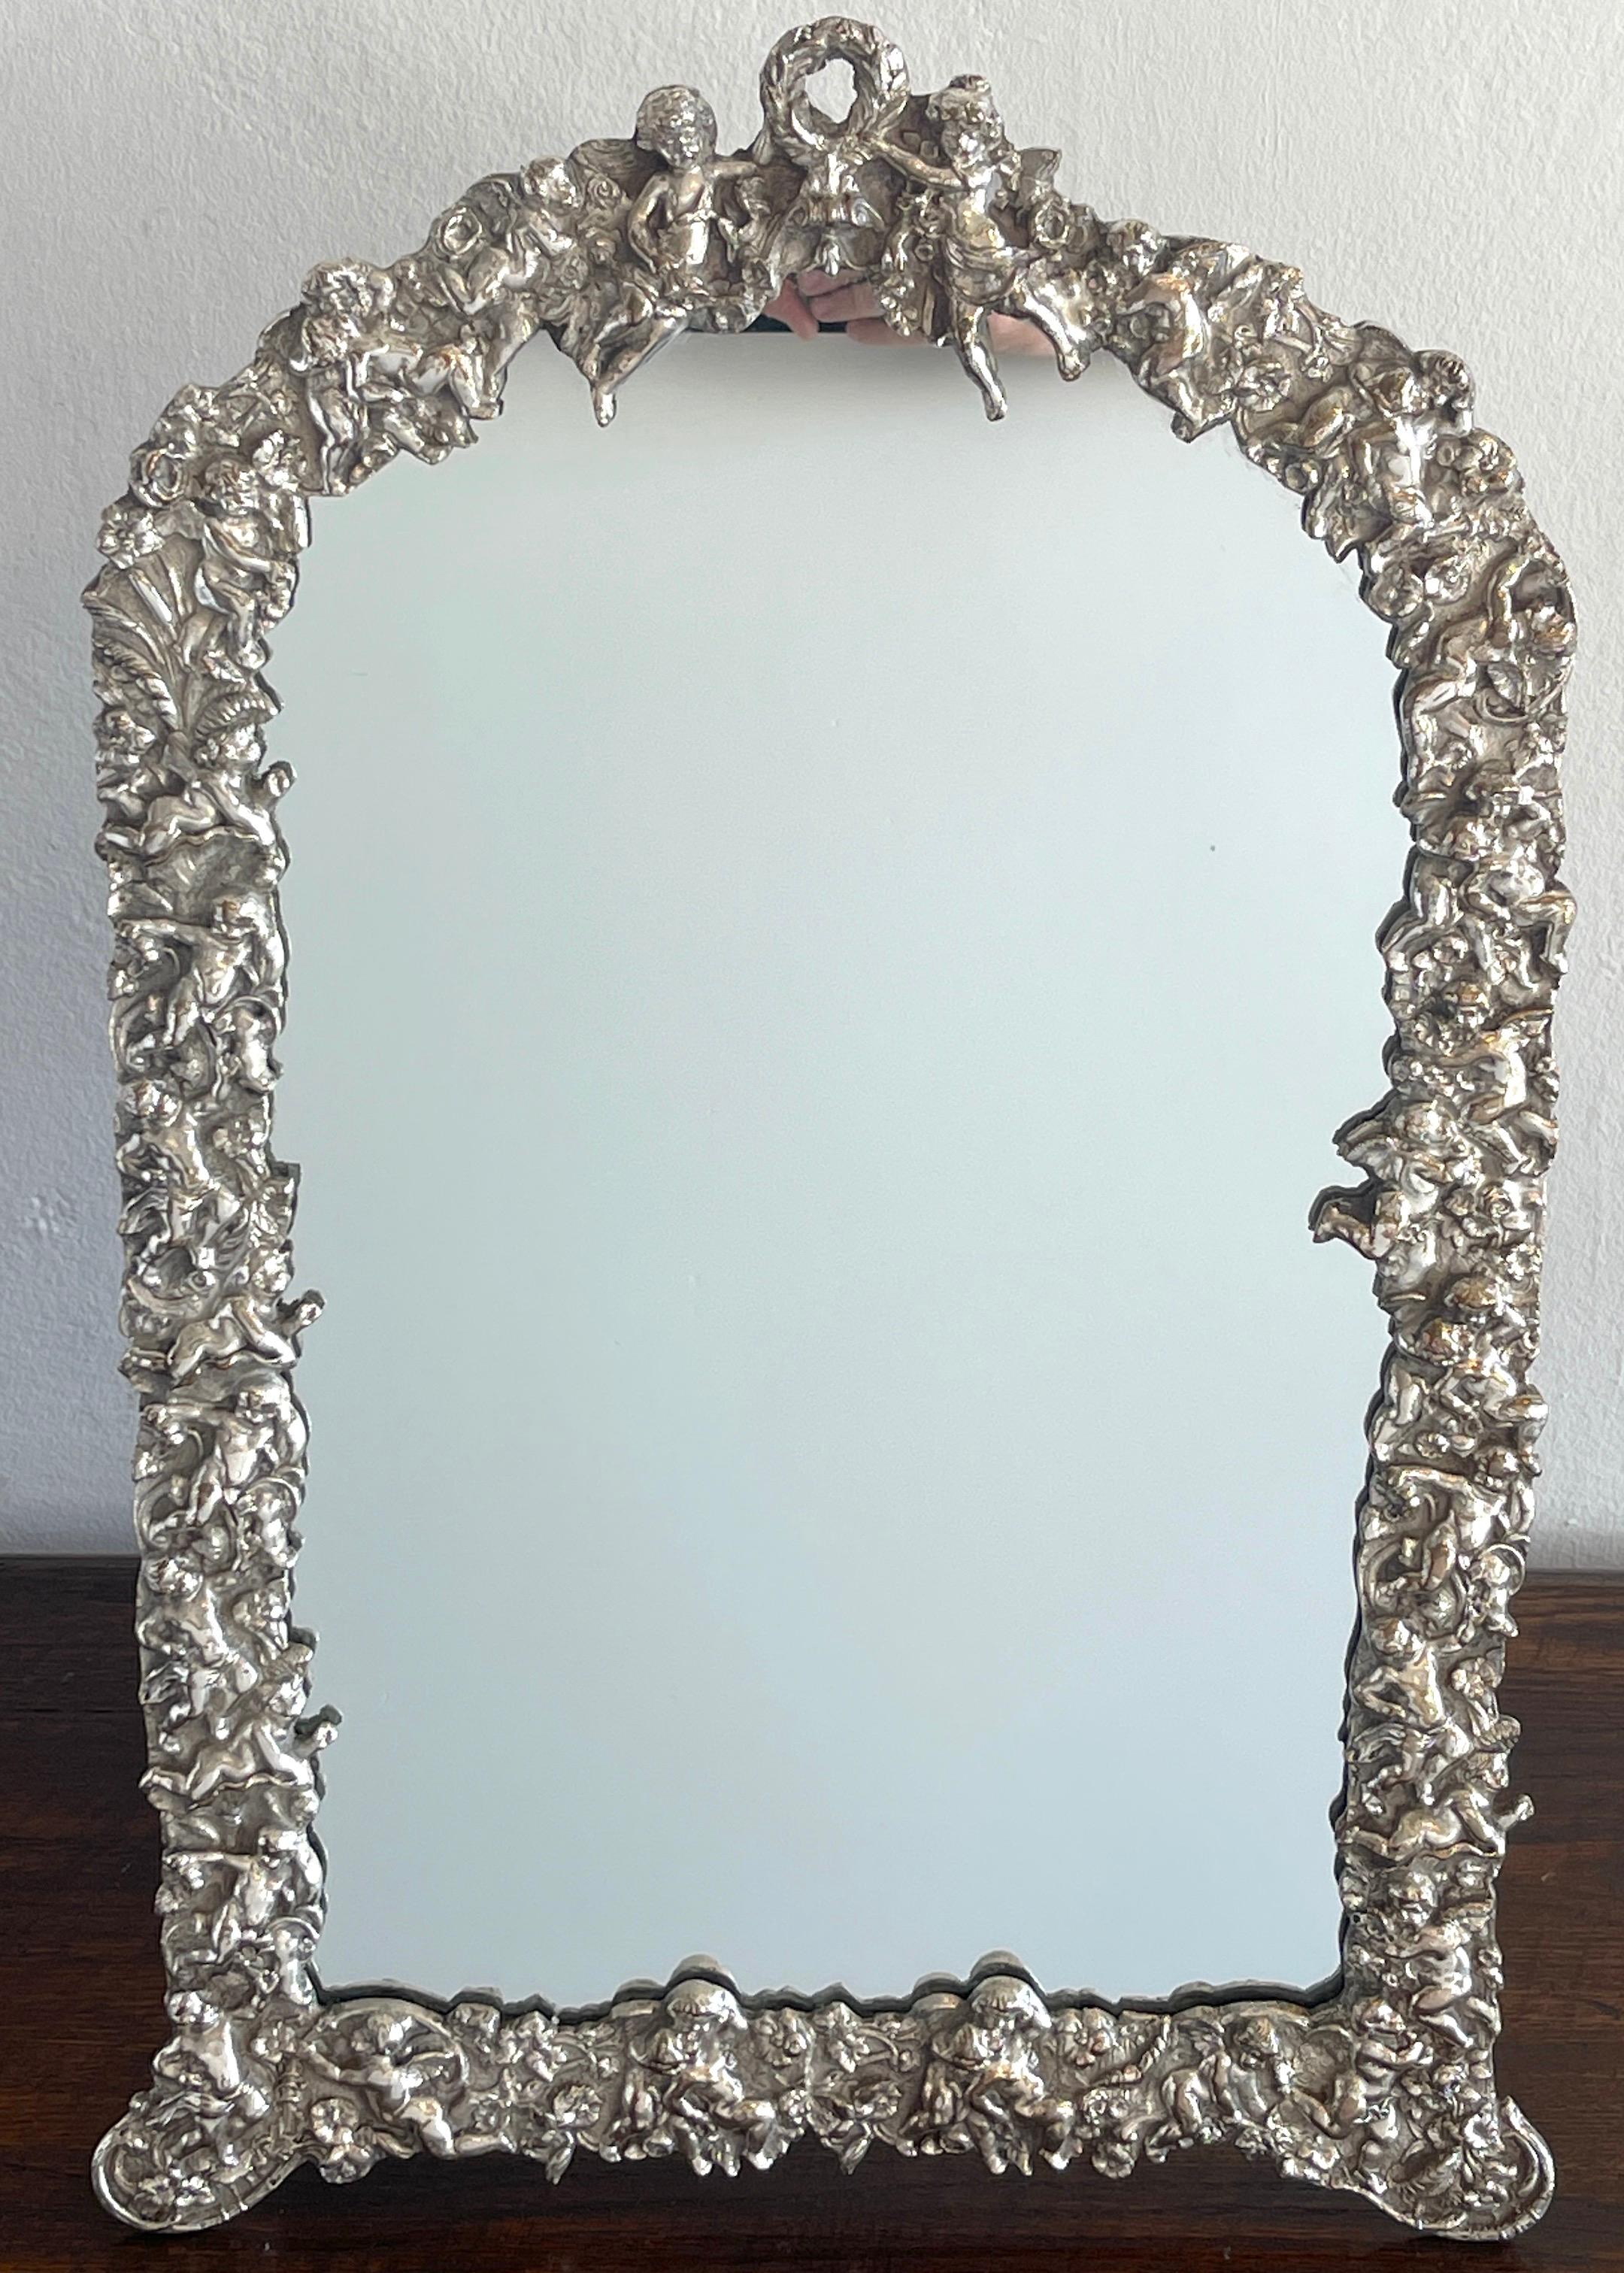 19th century French silverplated putti motif dressing mirror, with a continuous surround with frolicking putti. The inset mirror measures 20